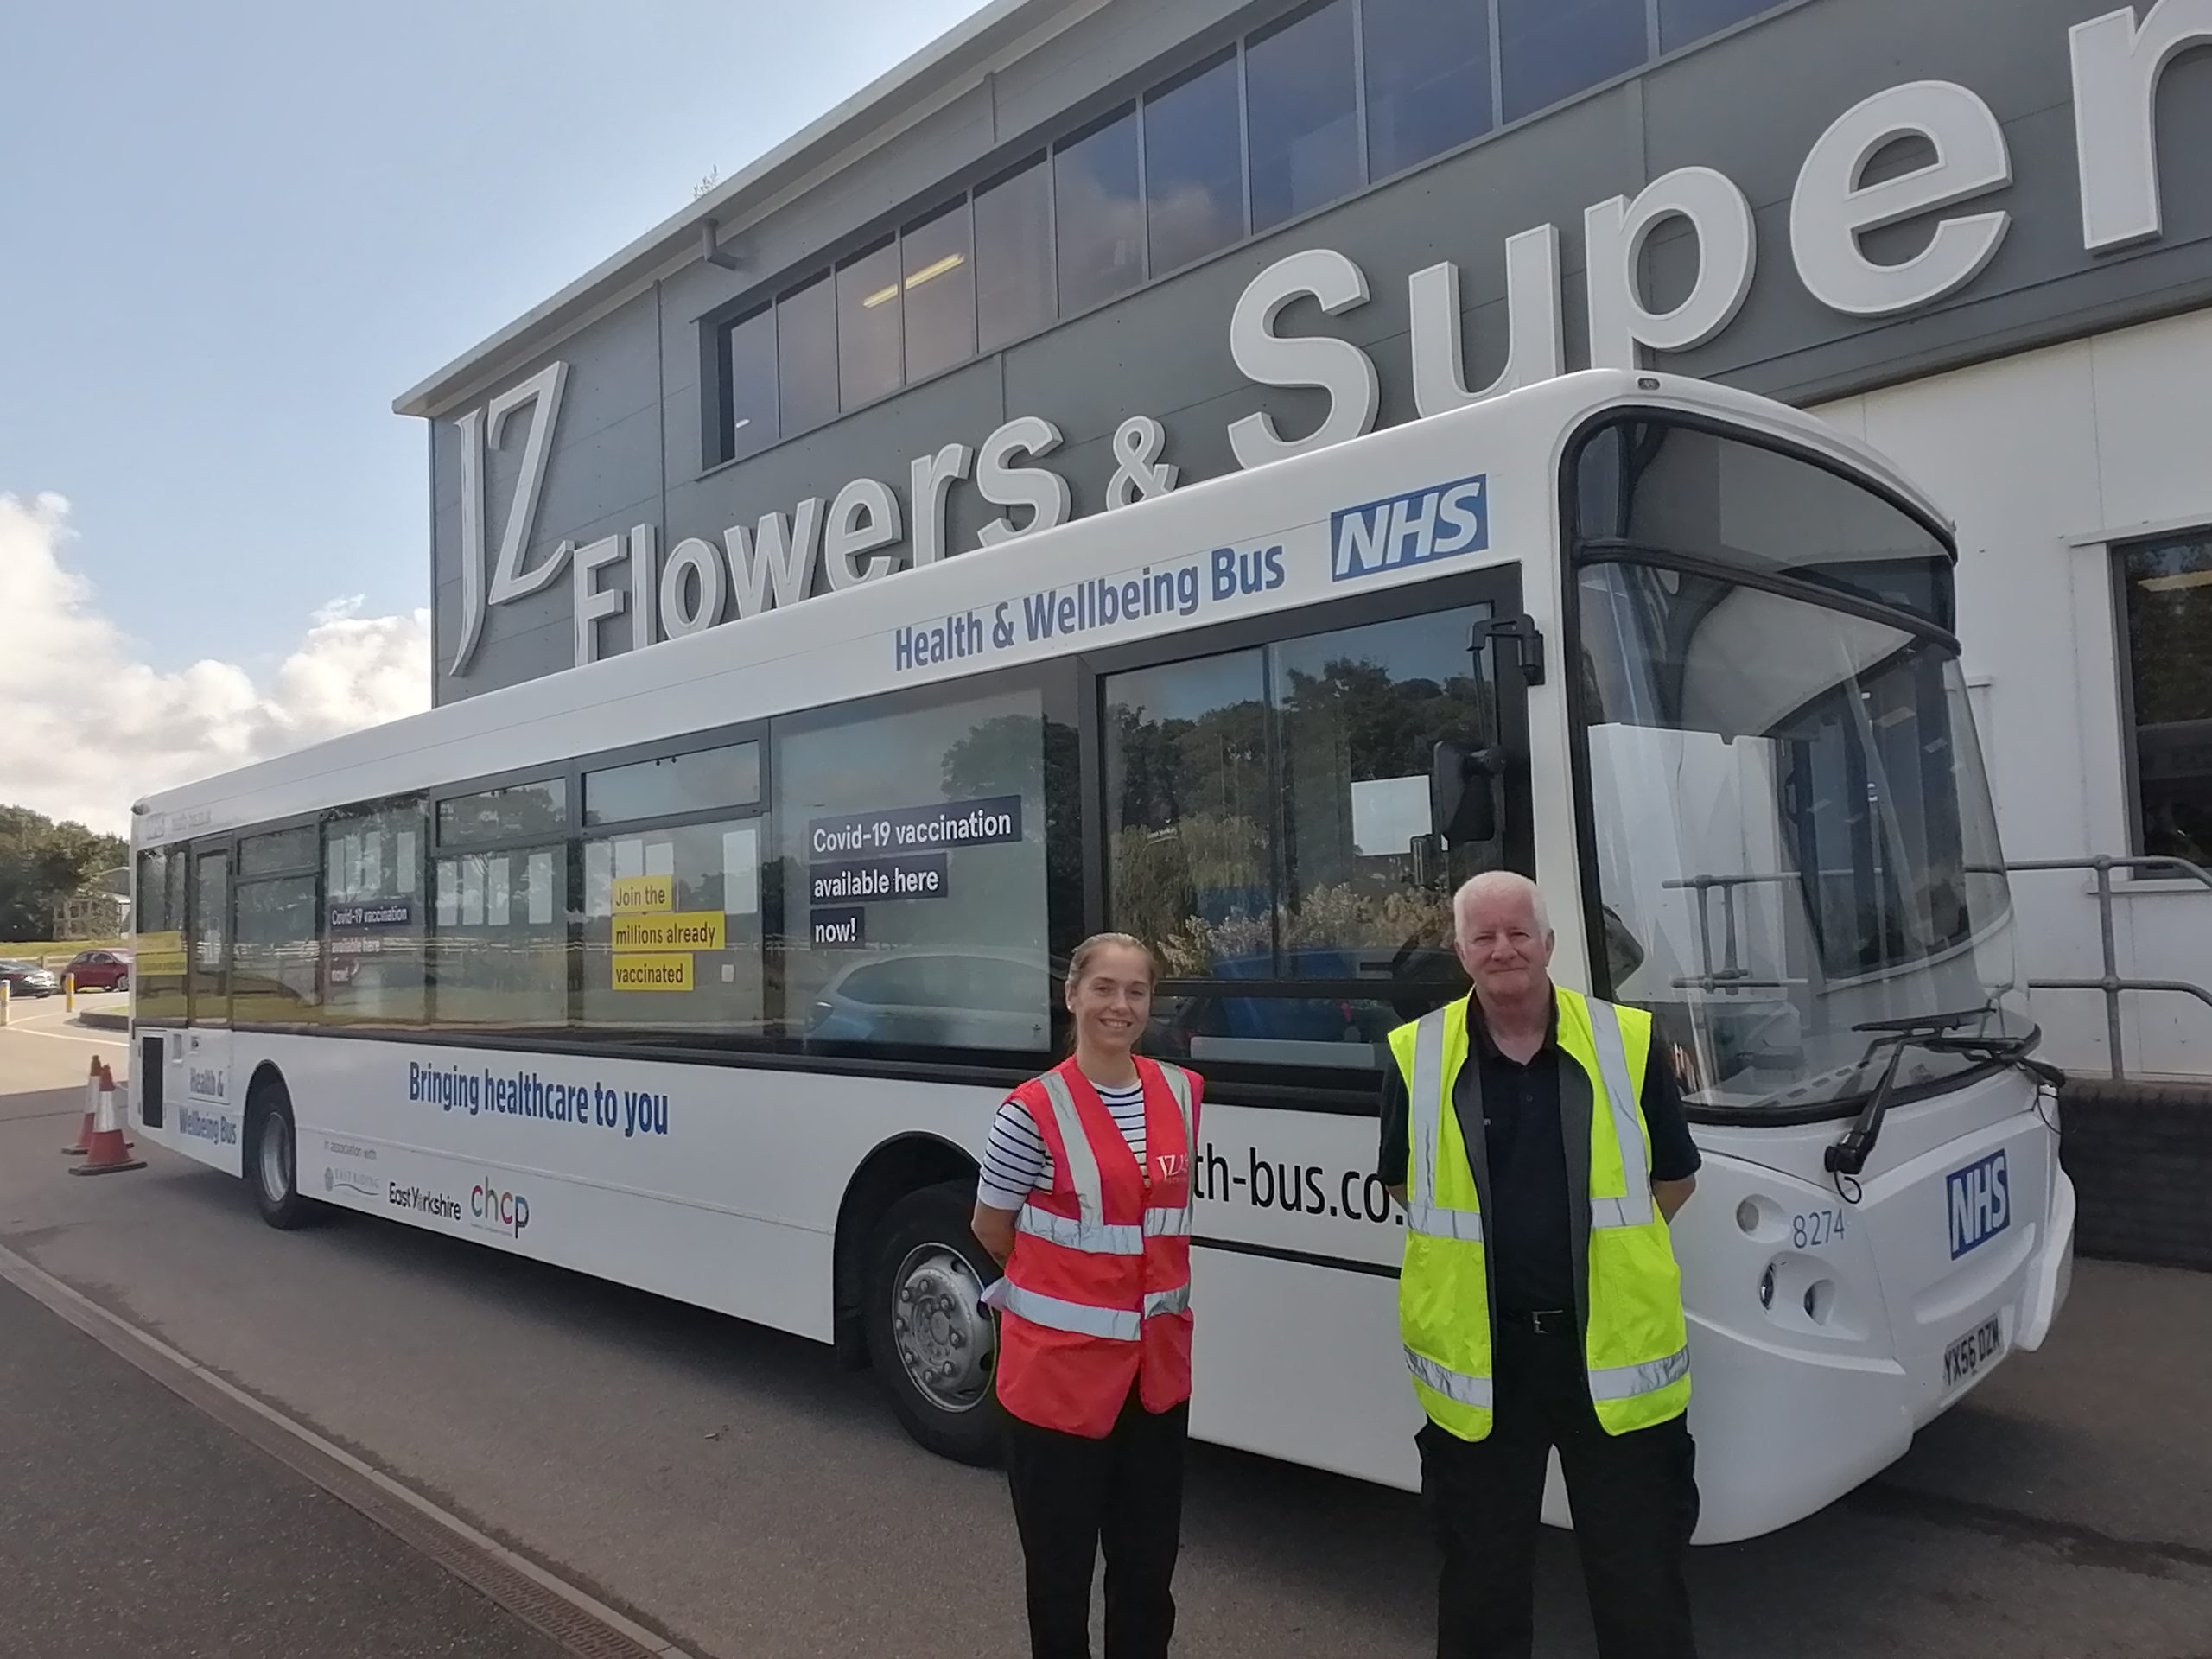 NHS COVID-19 Health & Wellbeing Vaccination Bus Visits JZ Flowers